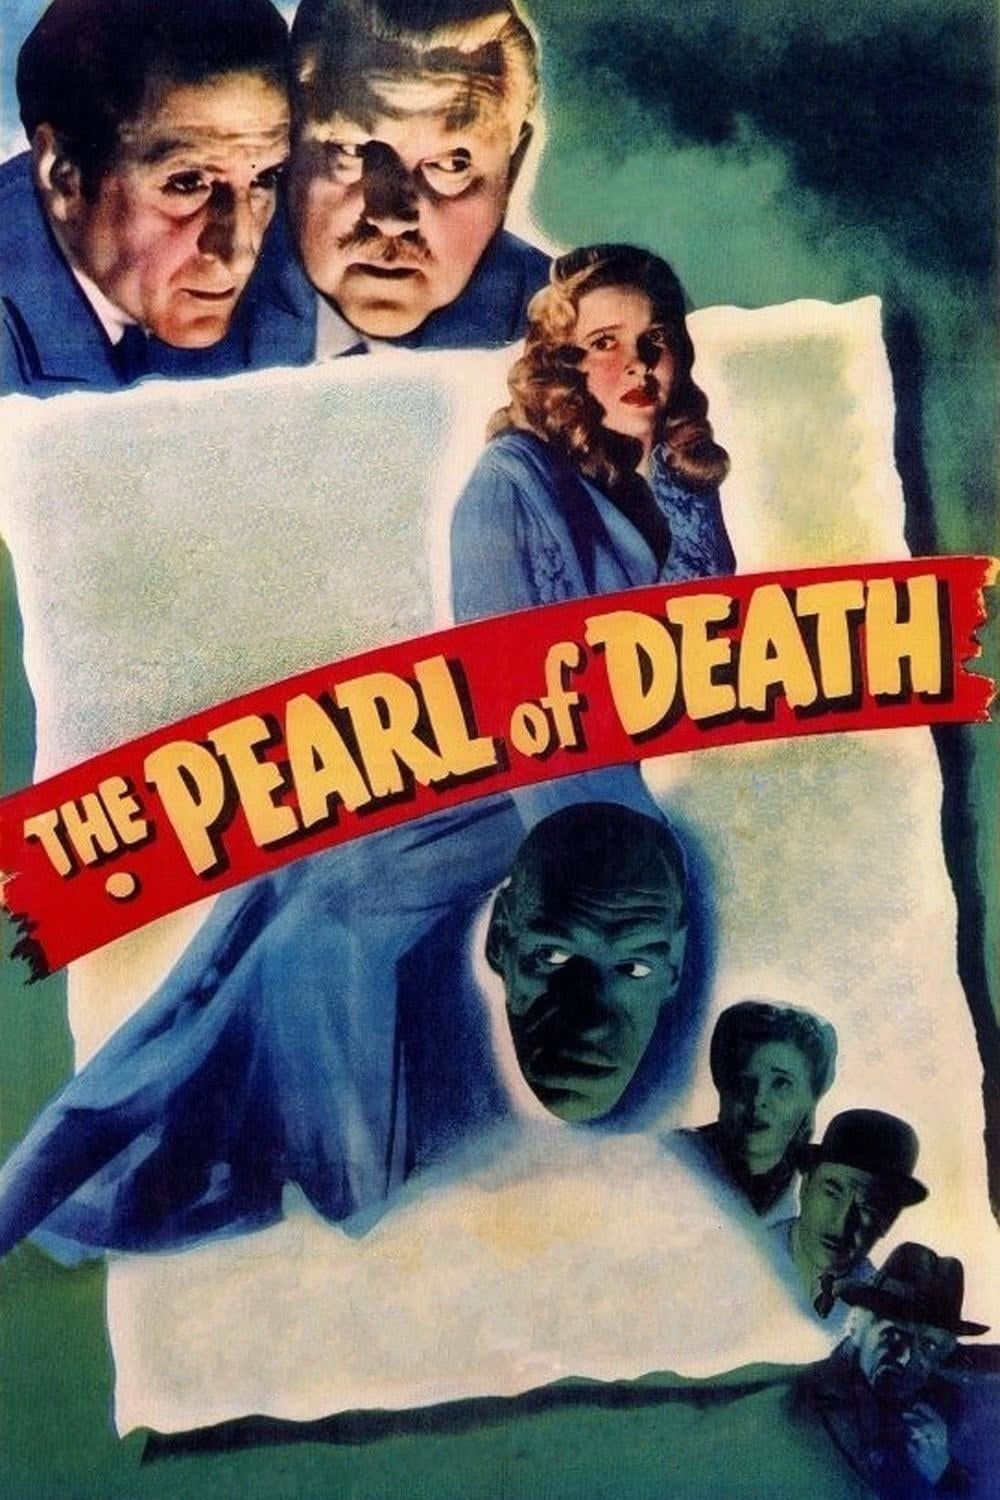 The Pearl of Death (1944)